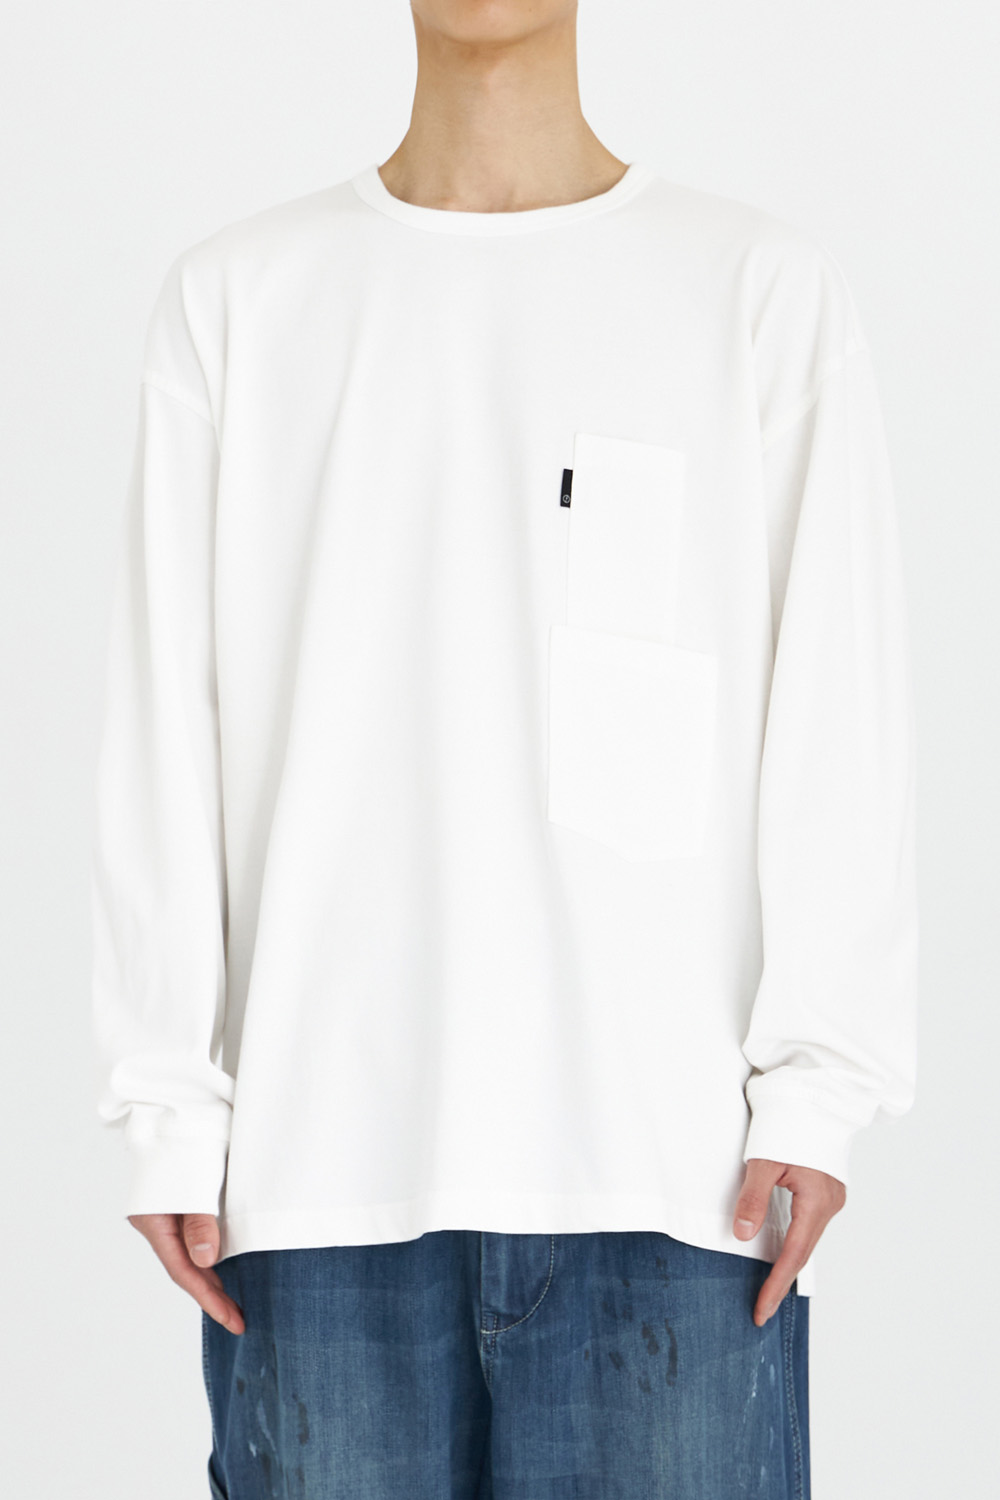 Baggy Pocket L/S Tee_White